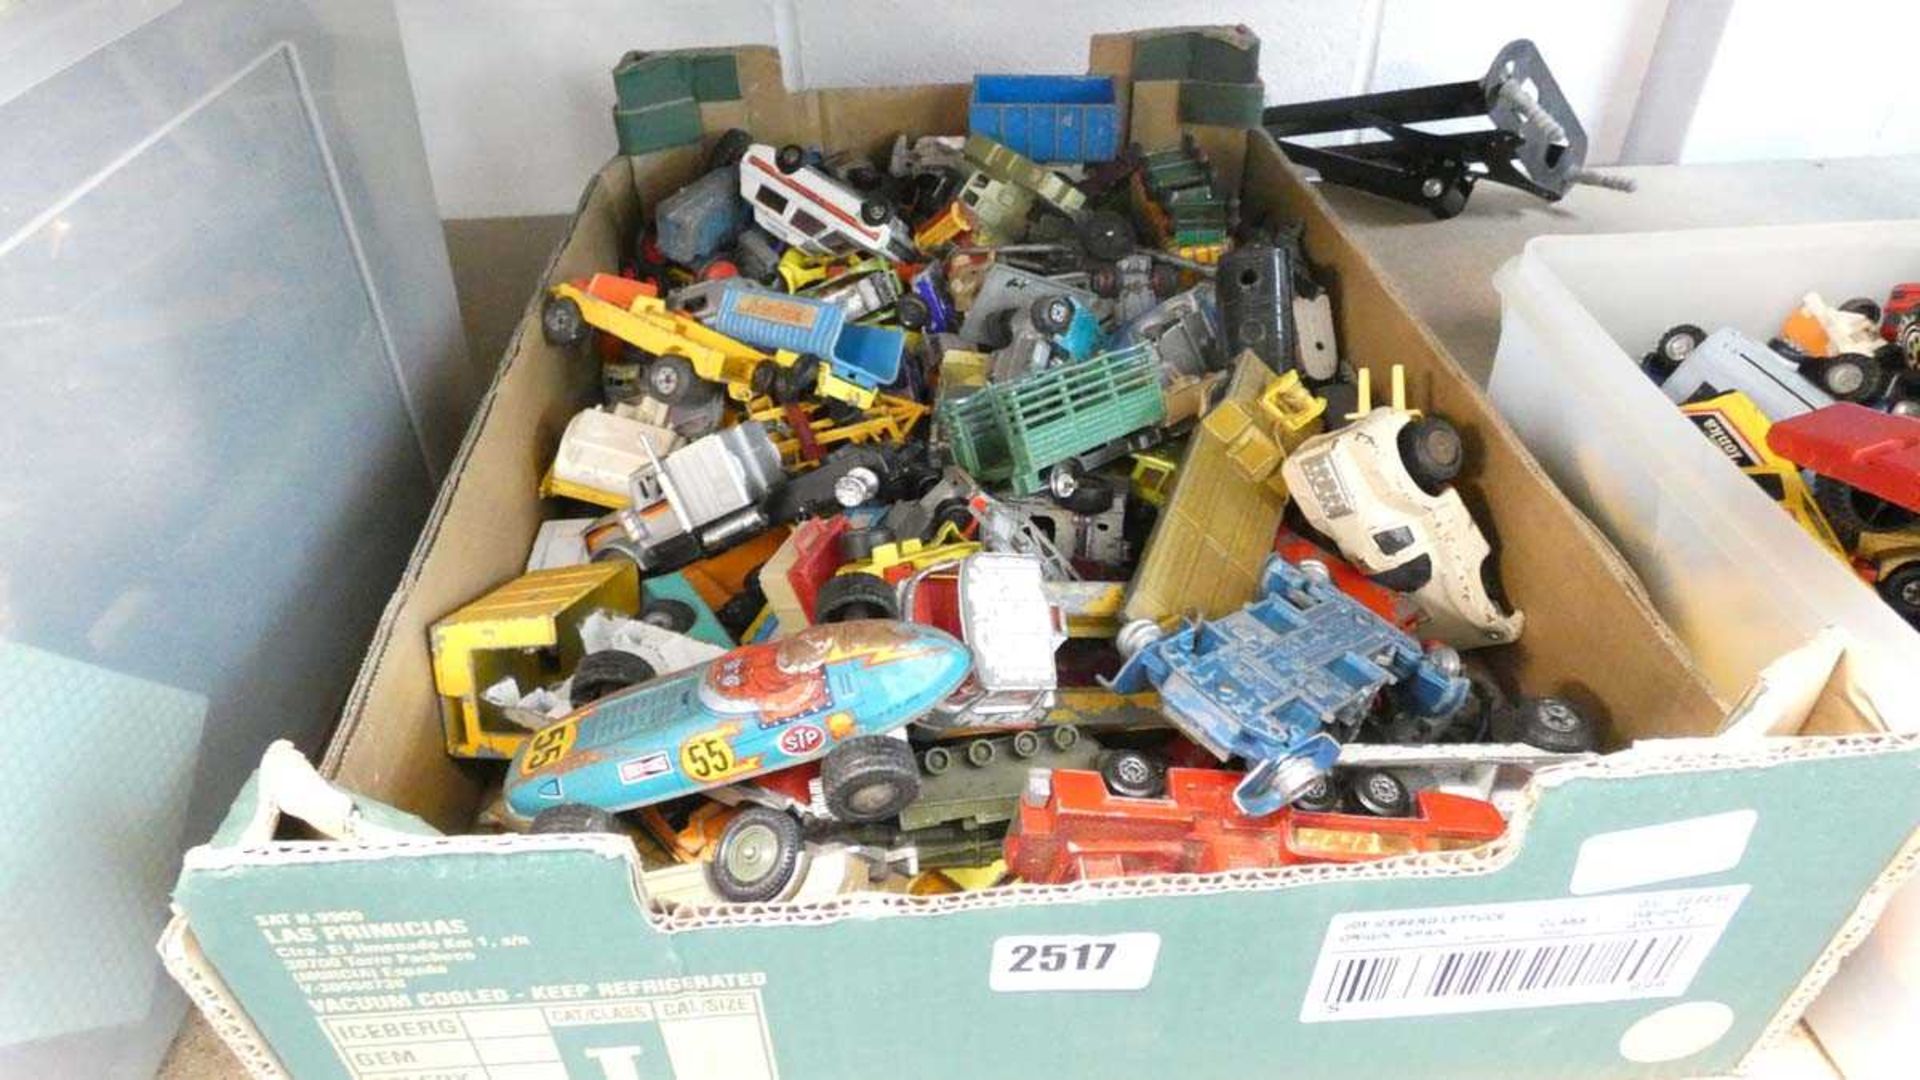 Large cardboard tray containing various die cast vehicles including Dinky and others